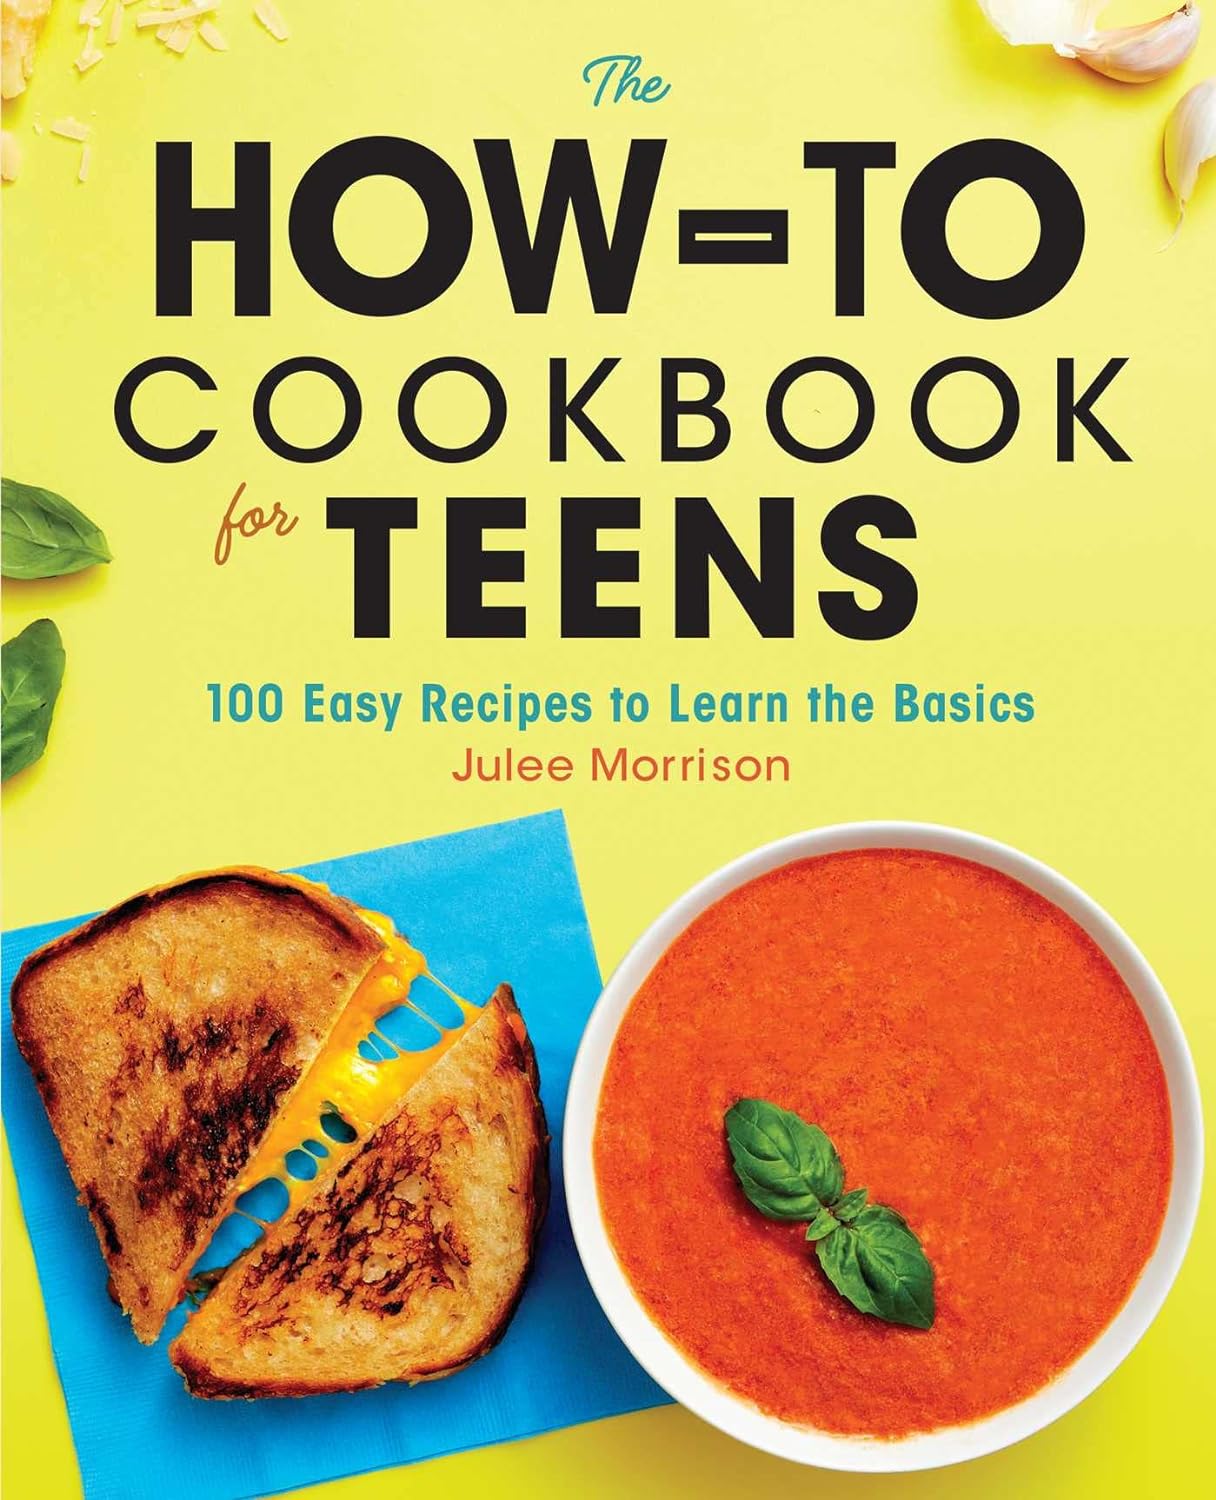 The How-To Cookbook for Teens: 100 Easy Recipes to Learn the Basics     Paperback – April 7, 2020